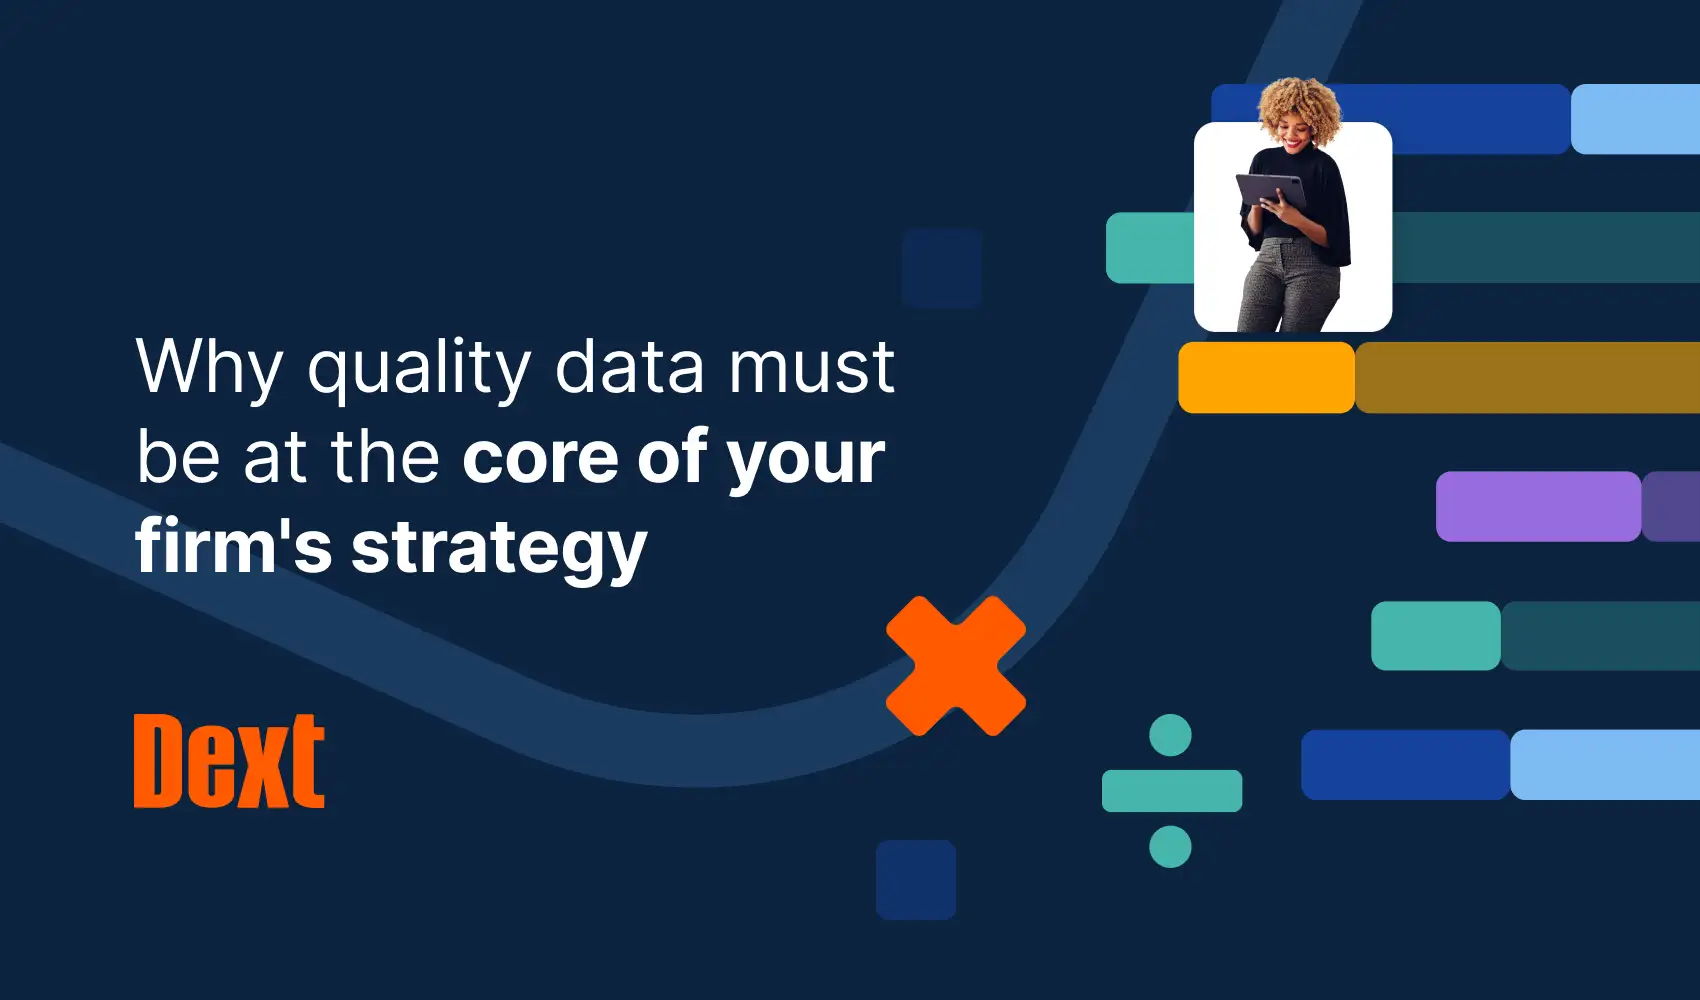 Why Quality Data Must Be at the Core of Your Firm’s Strategy by Dext image